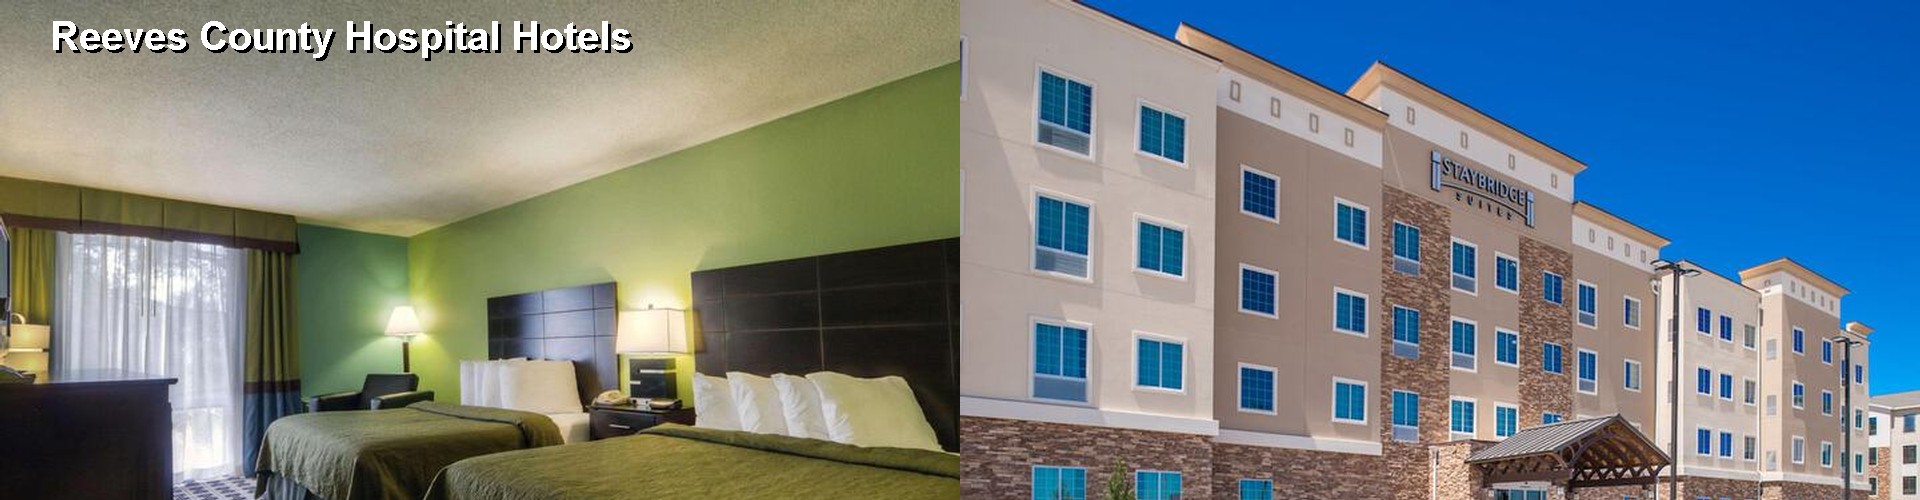 5 Best Hotels near Reeves County Hospital